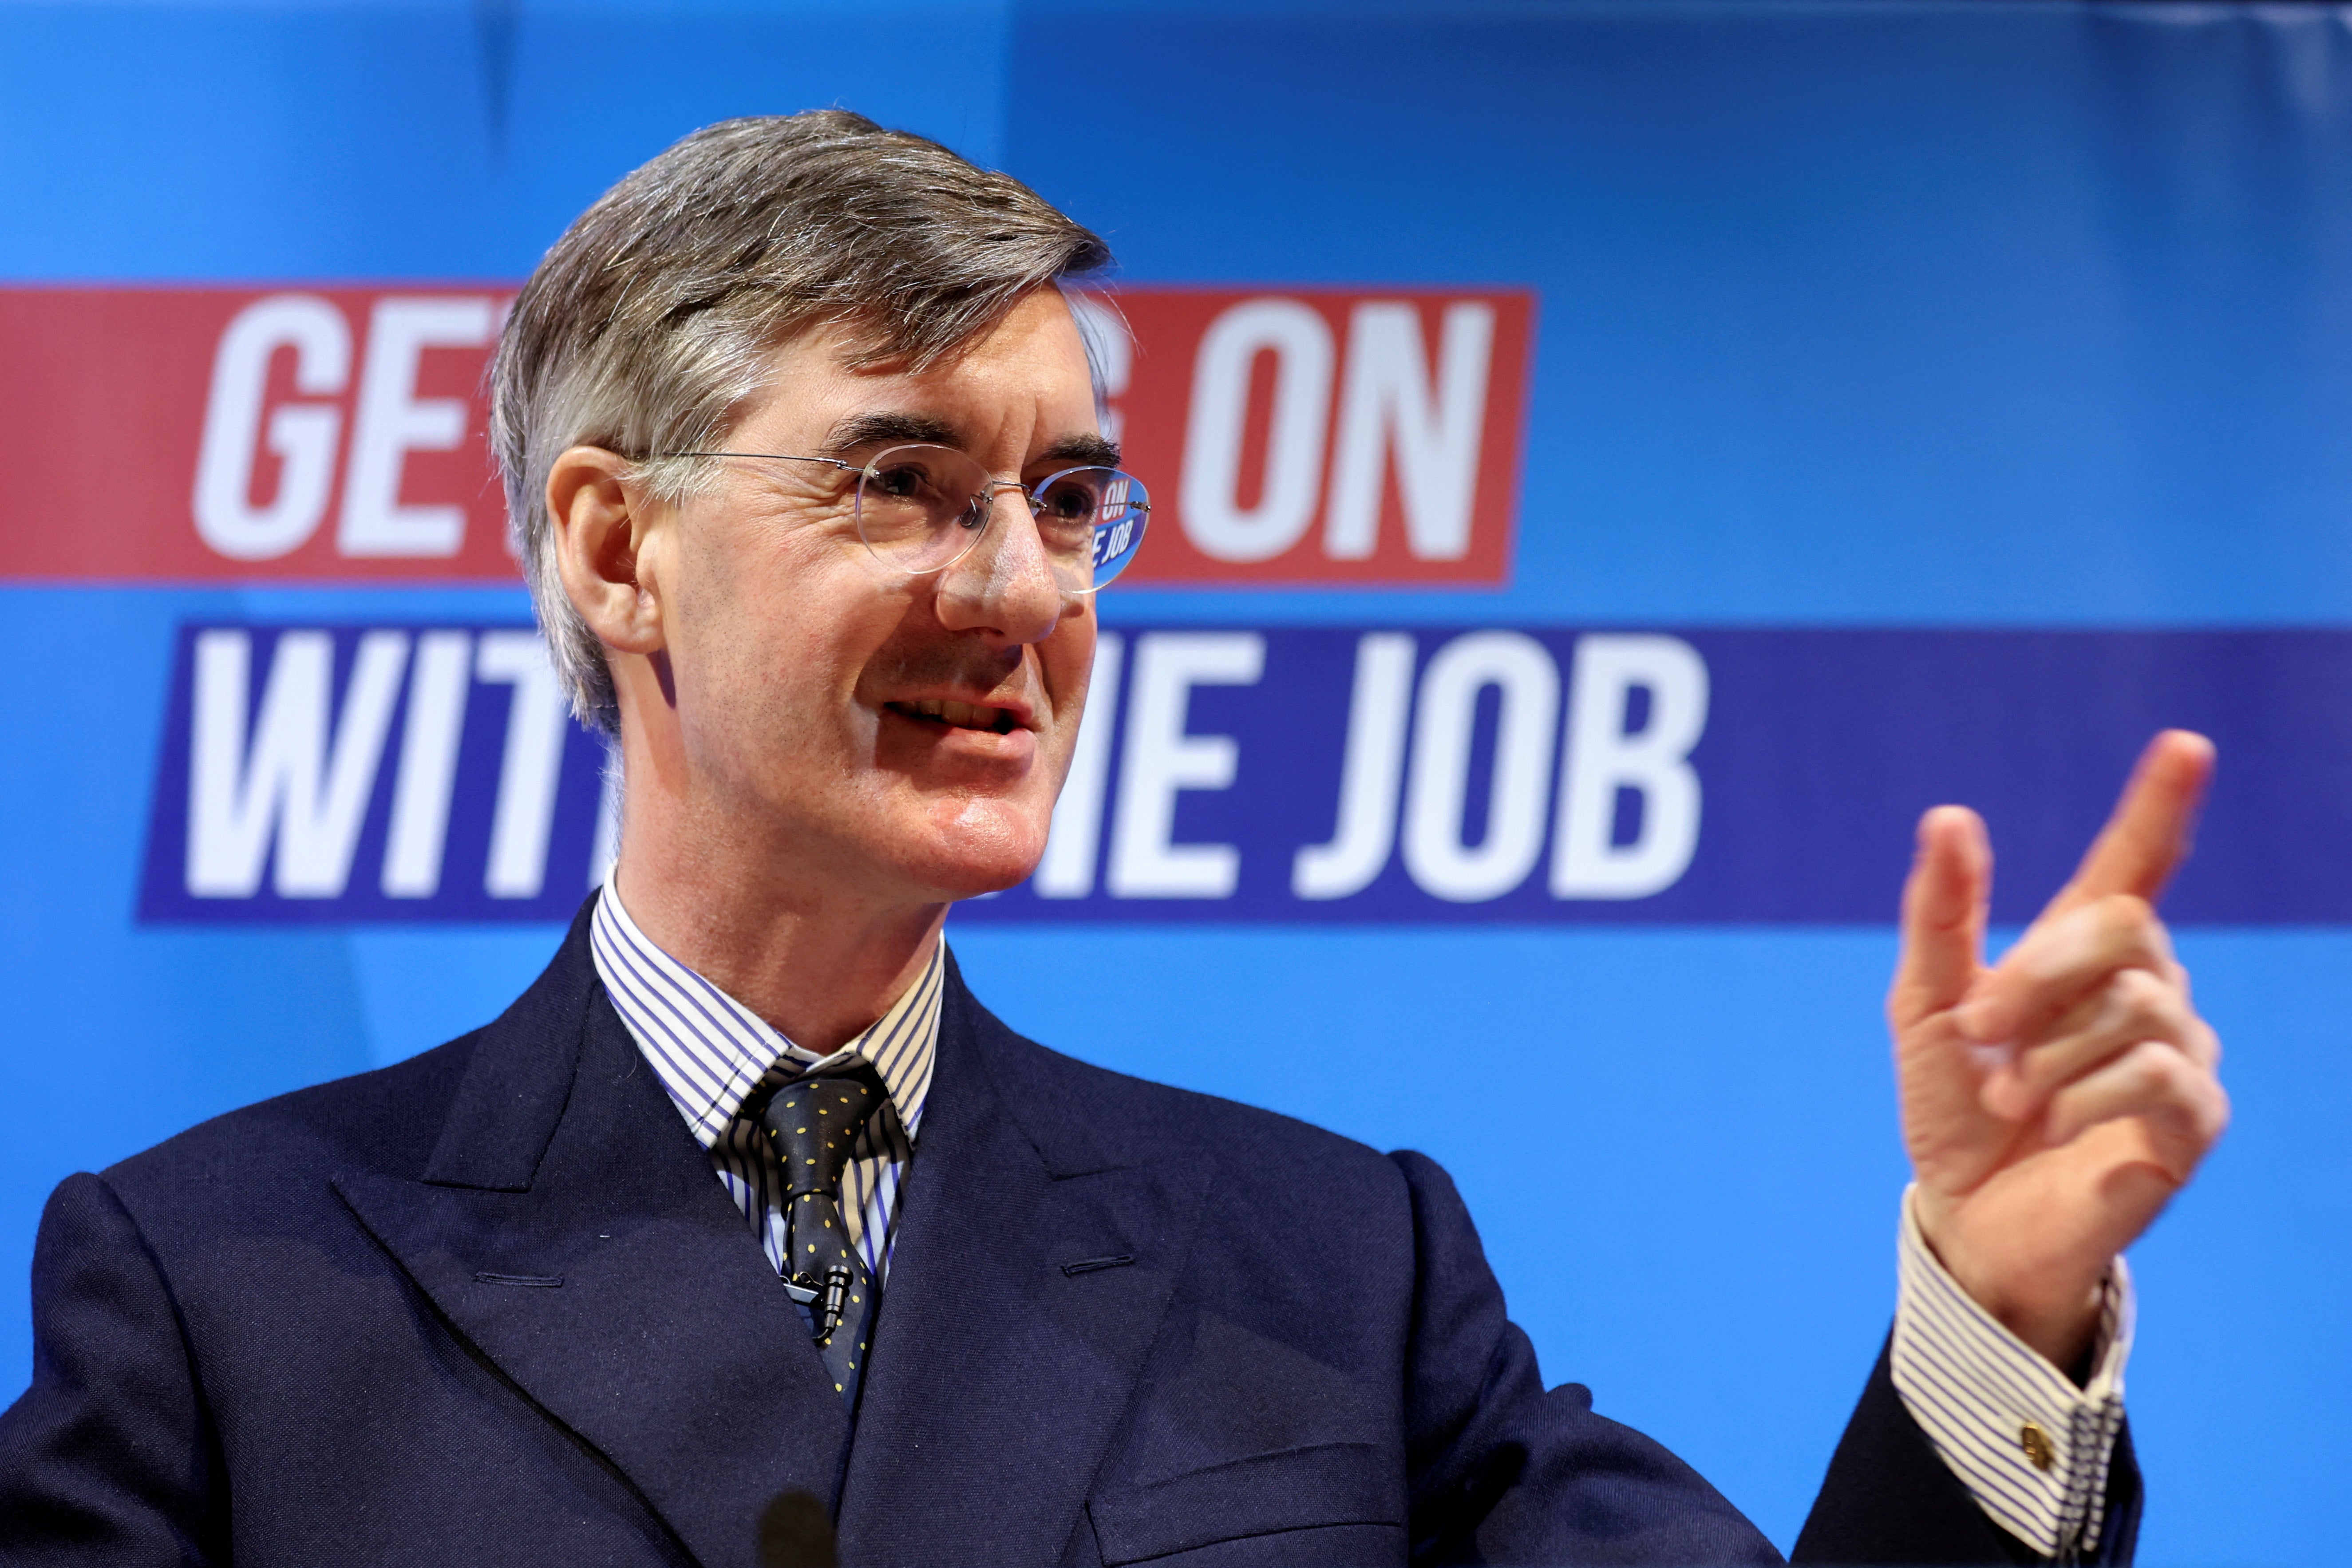 ‘Someone introduce him to email and Zoom please,’ a Labour MP said of Jacob Rees-Mogg